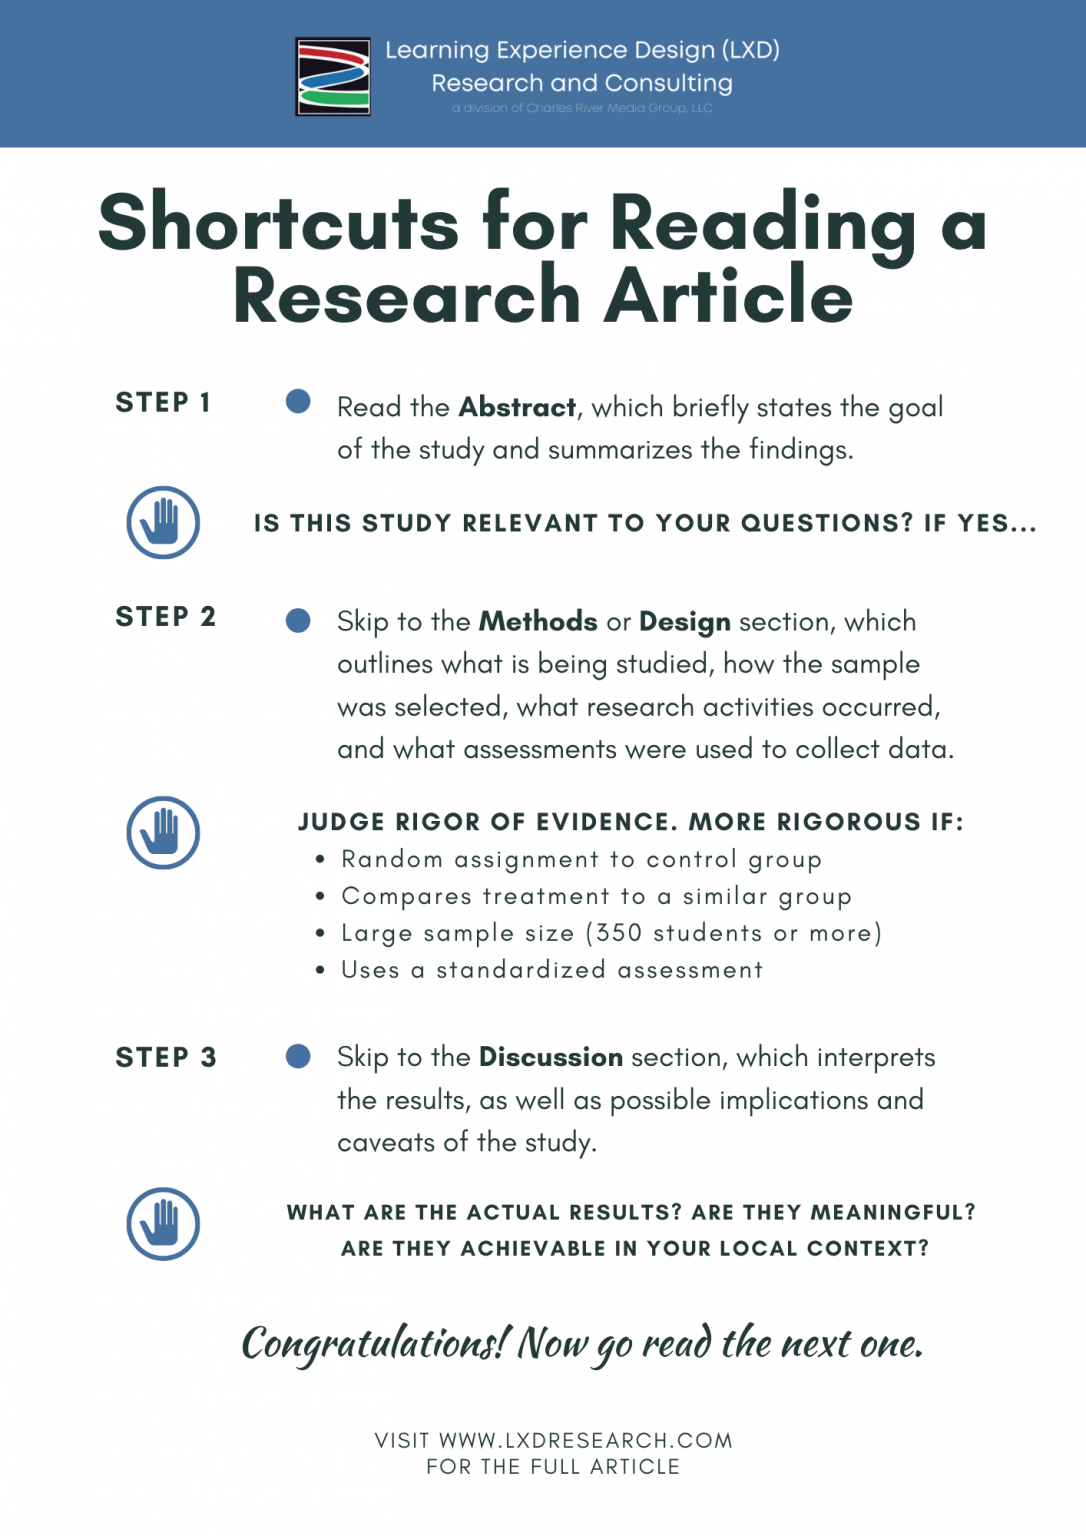 reading a research article quickly and efficiently